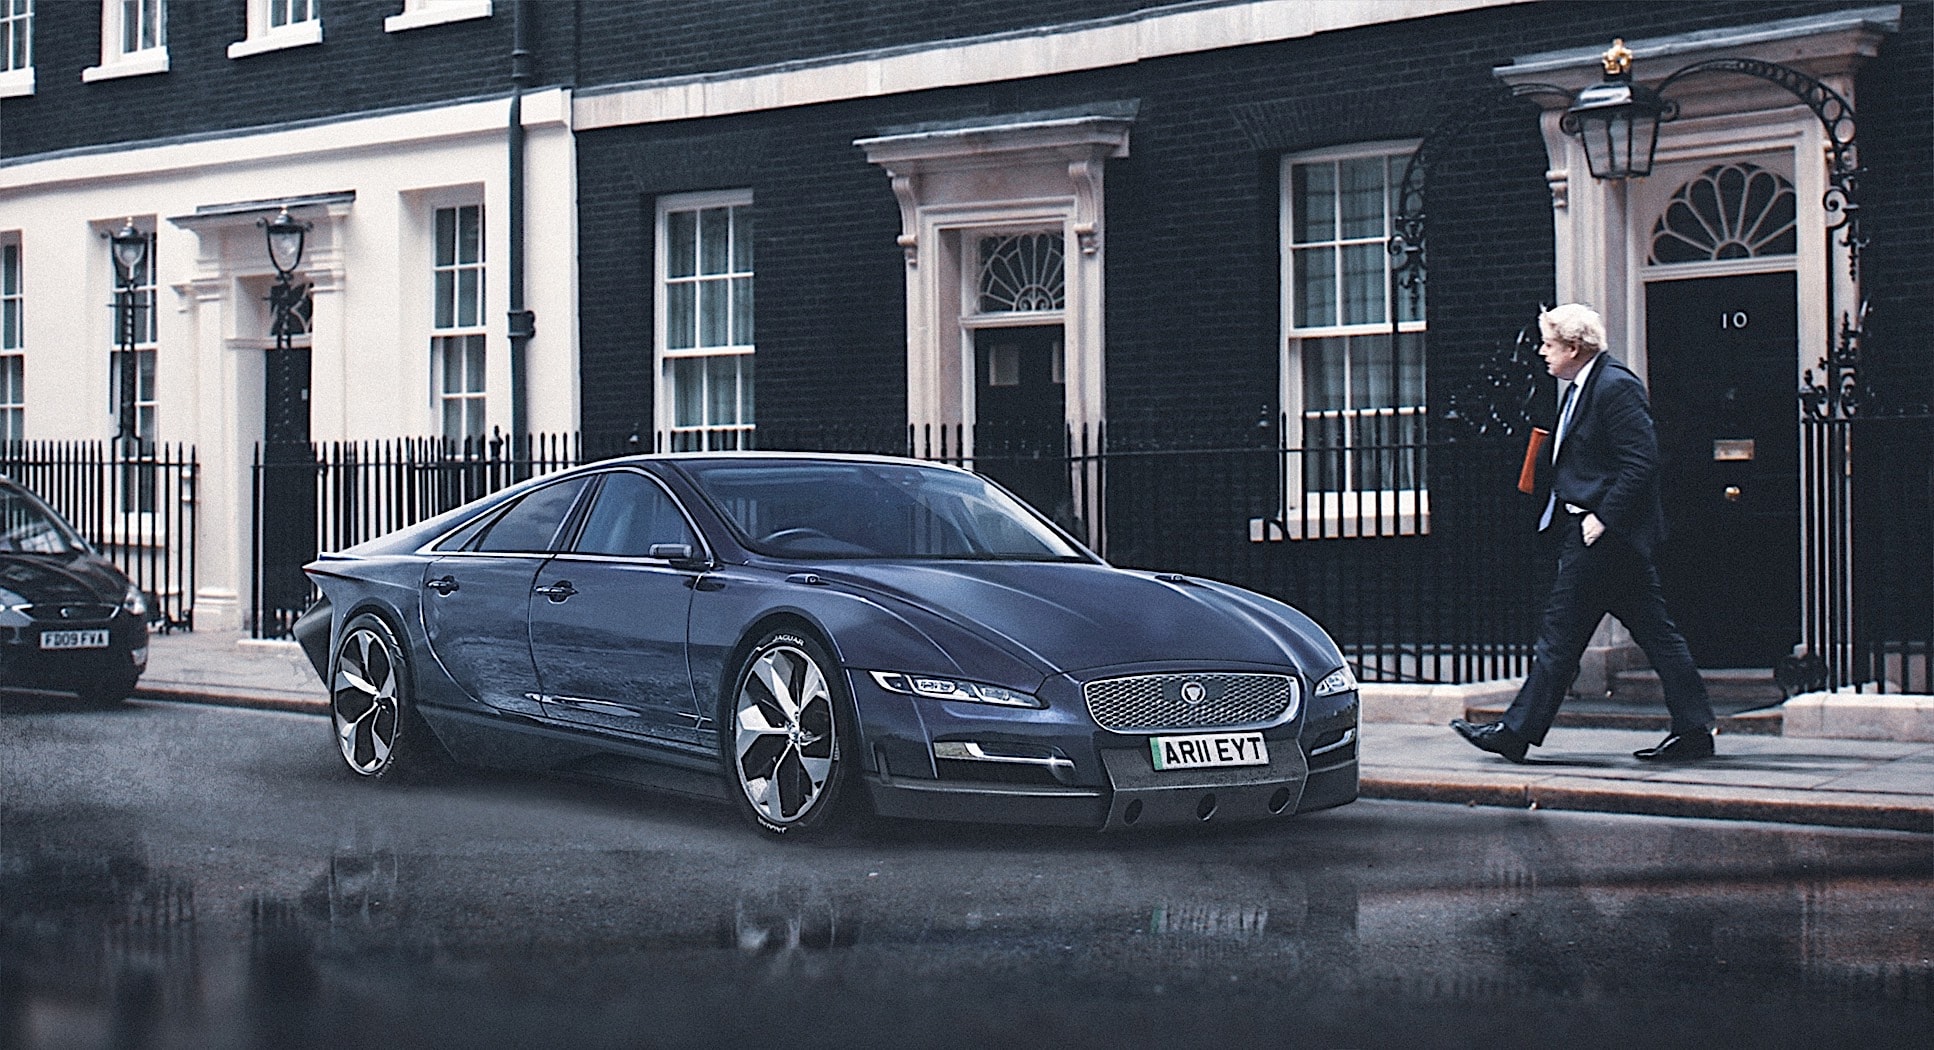 Boris Johnson May Never Drive This Electric Jaguar XJ, Would Have Been